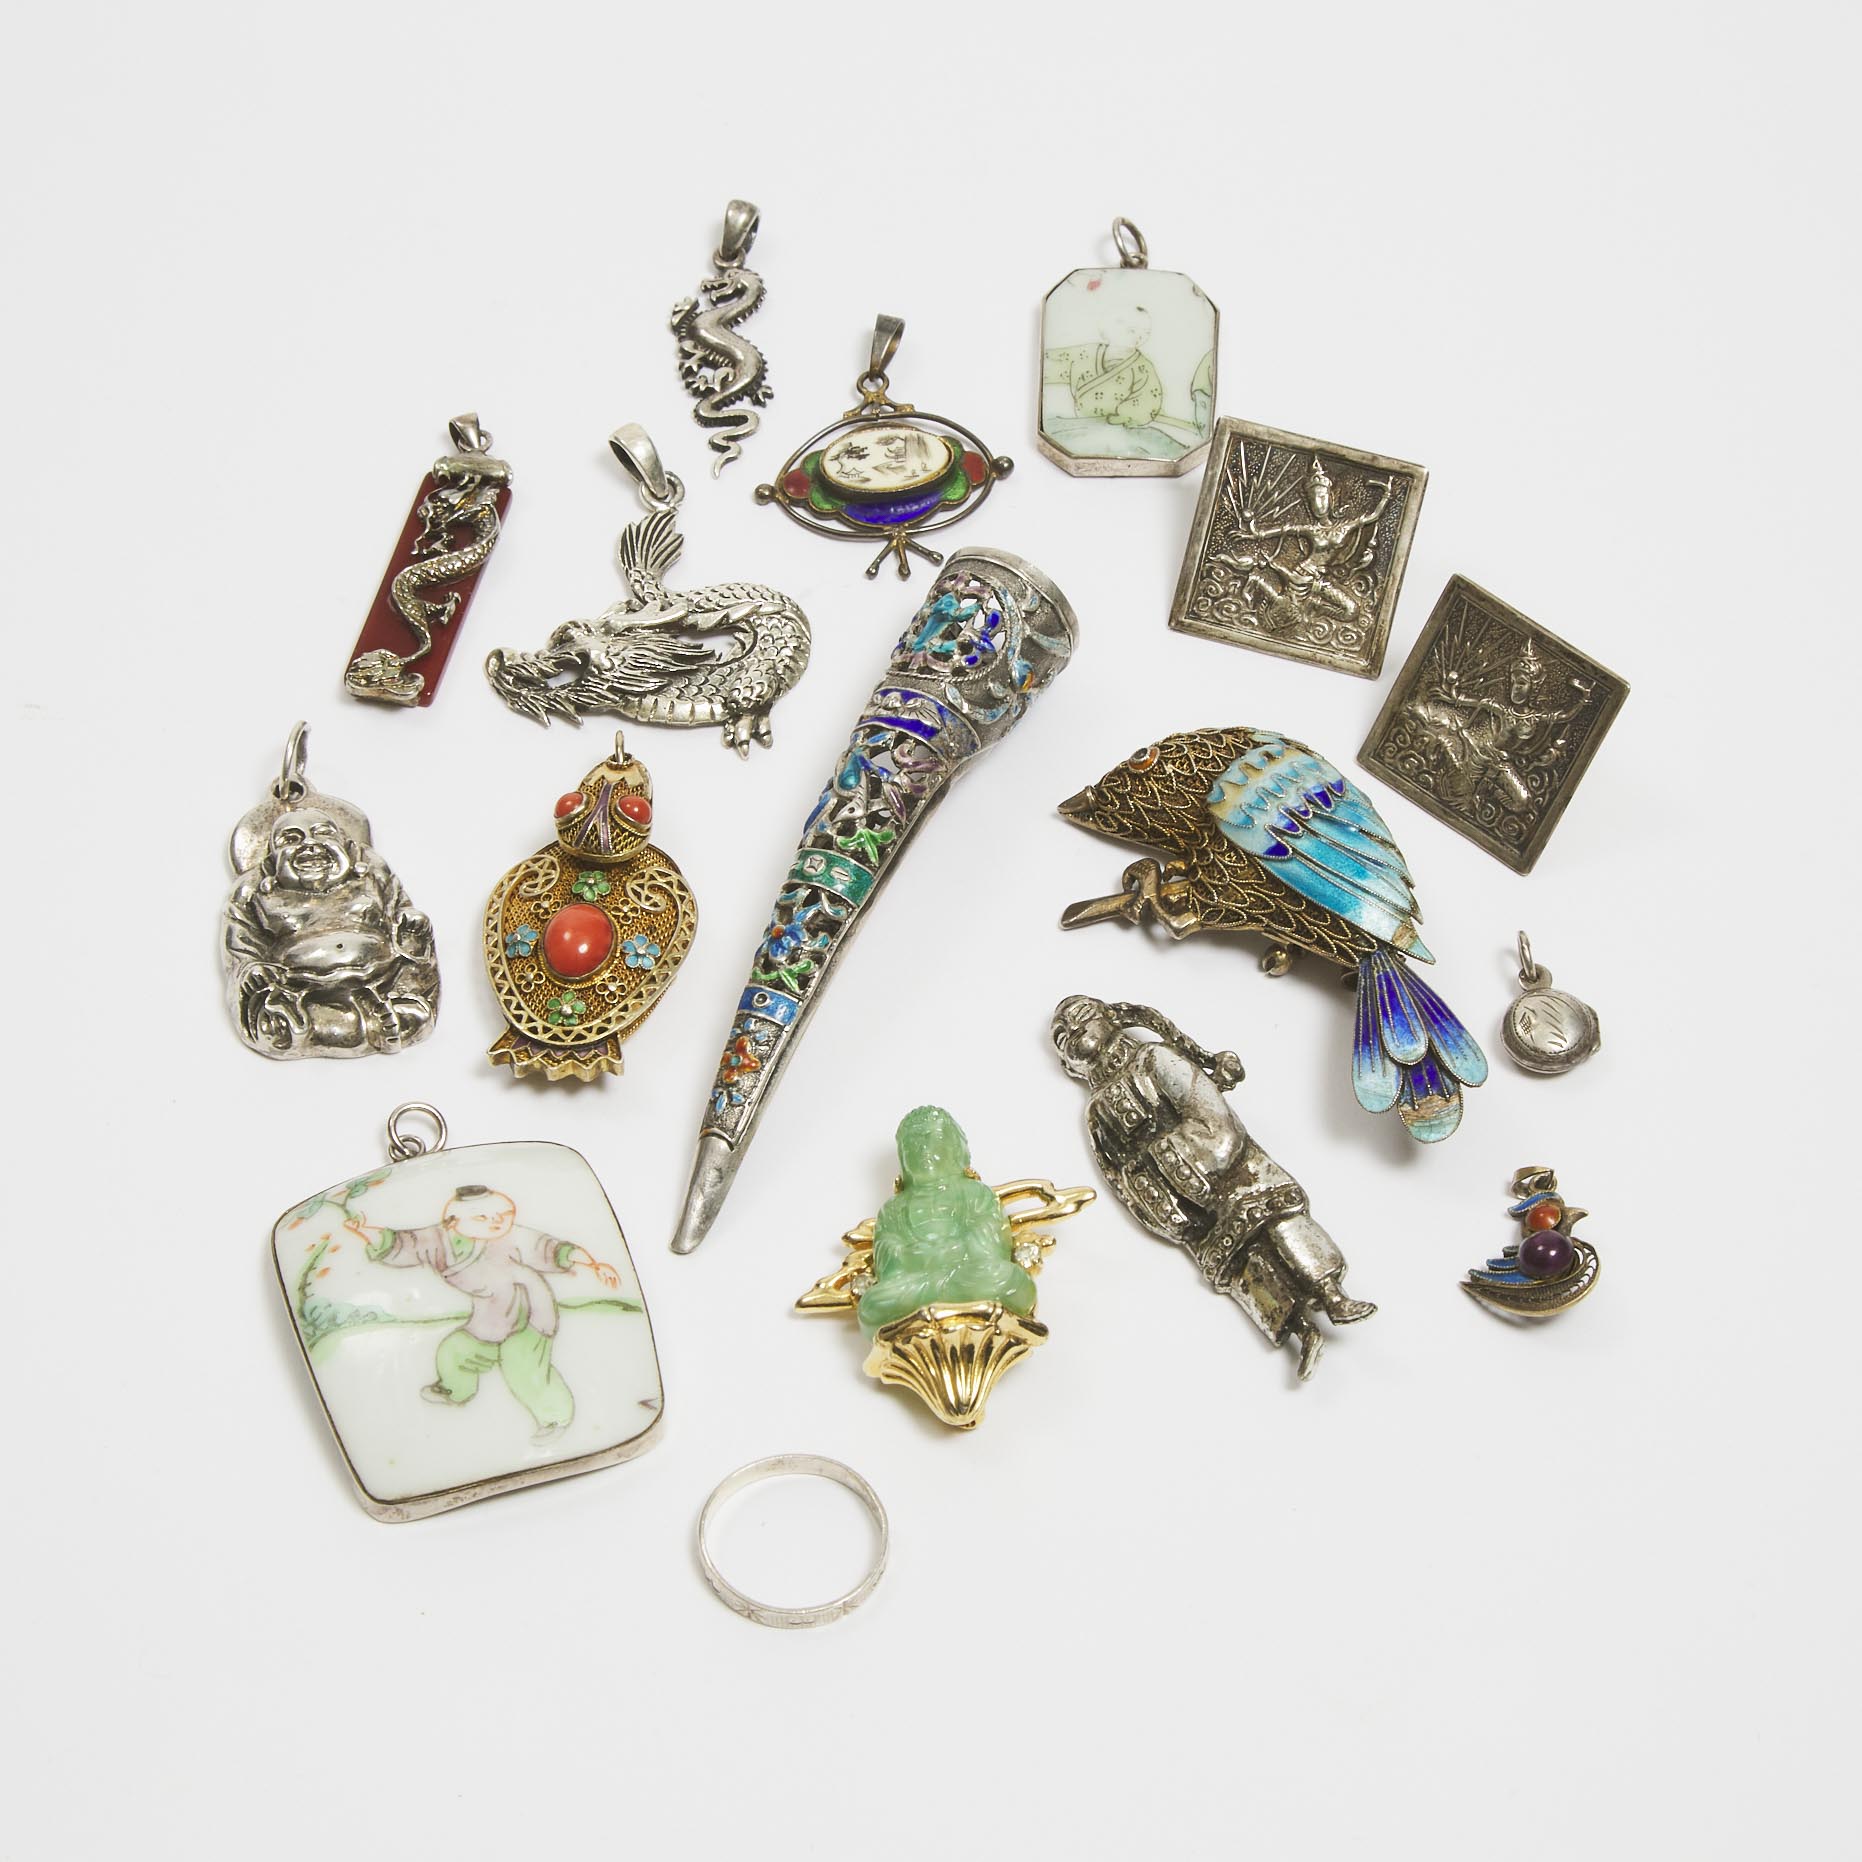 A Large Quantity of Silver, Enameled and Porcelain Jewellery, 19th/20th Century 